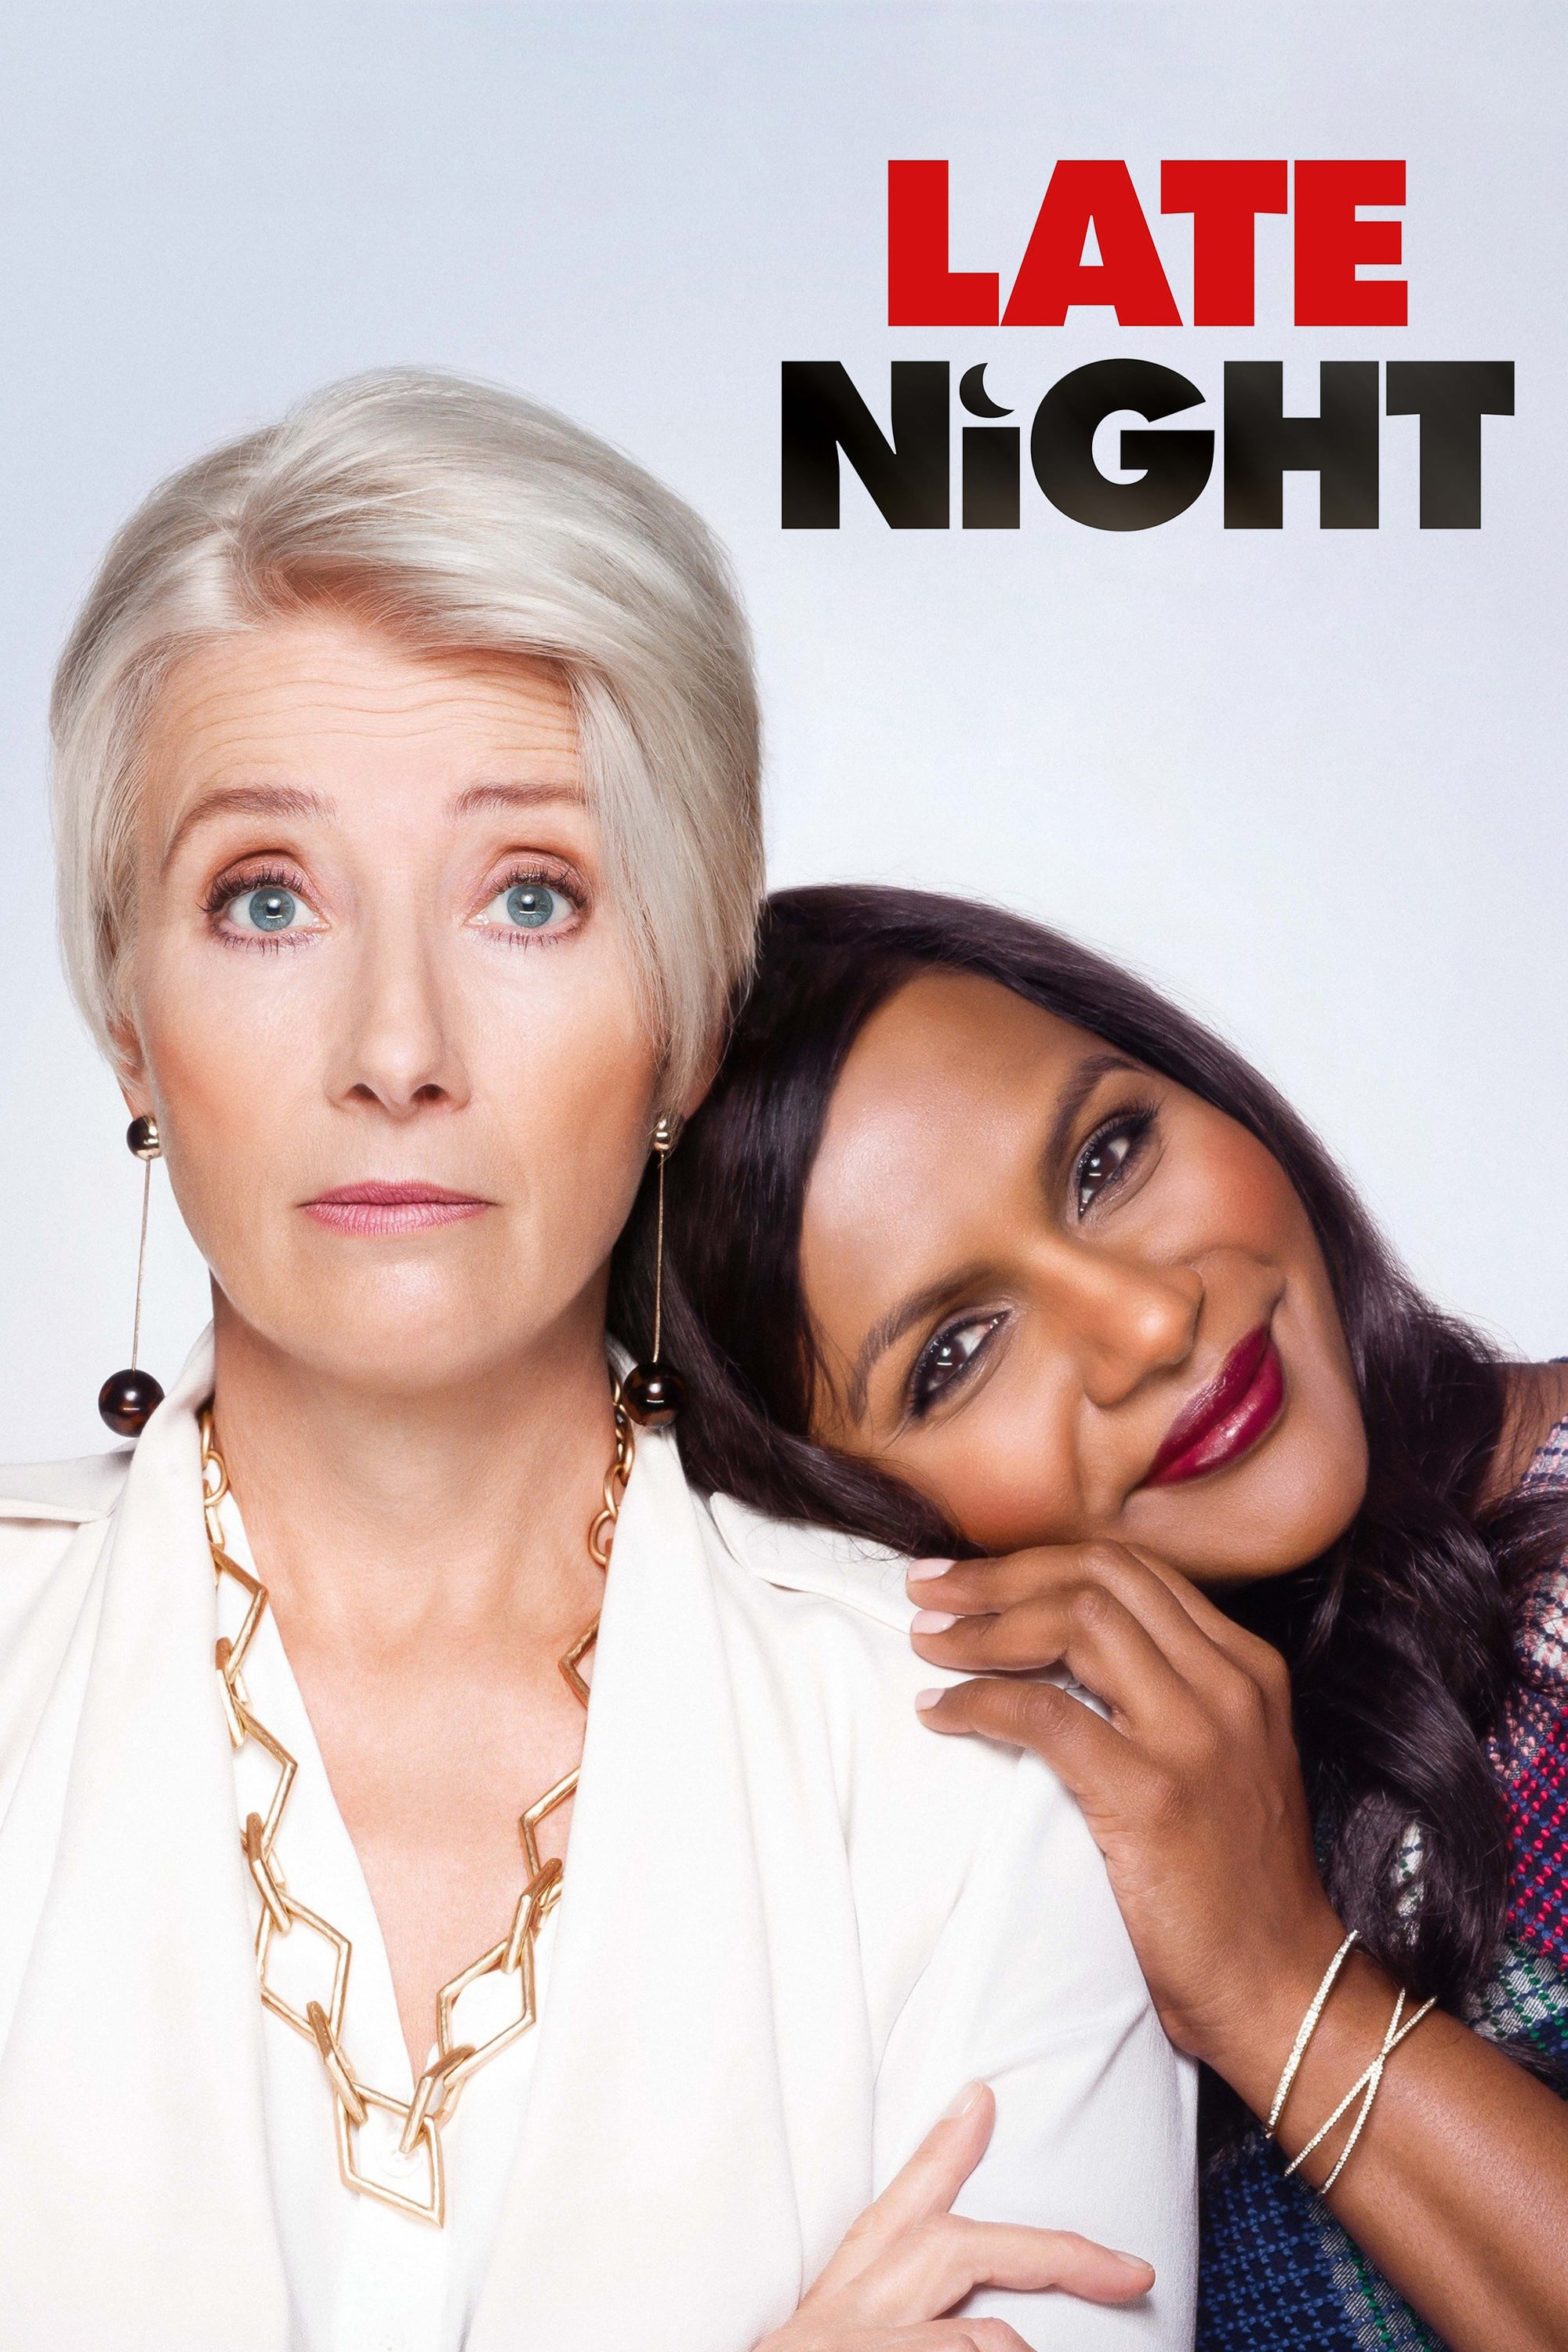 Poster for the movie "Late Night"